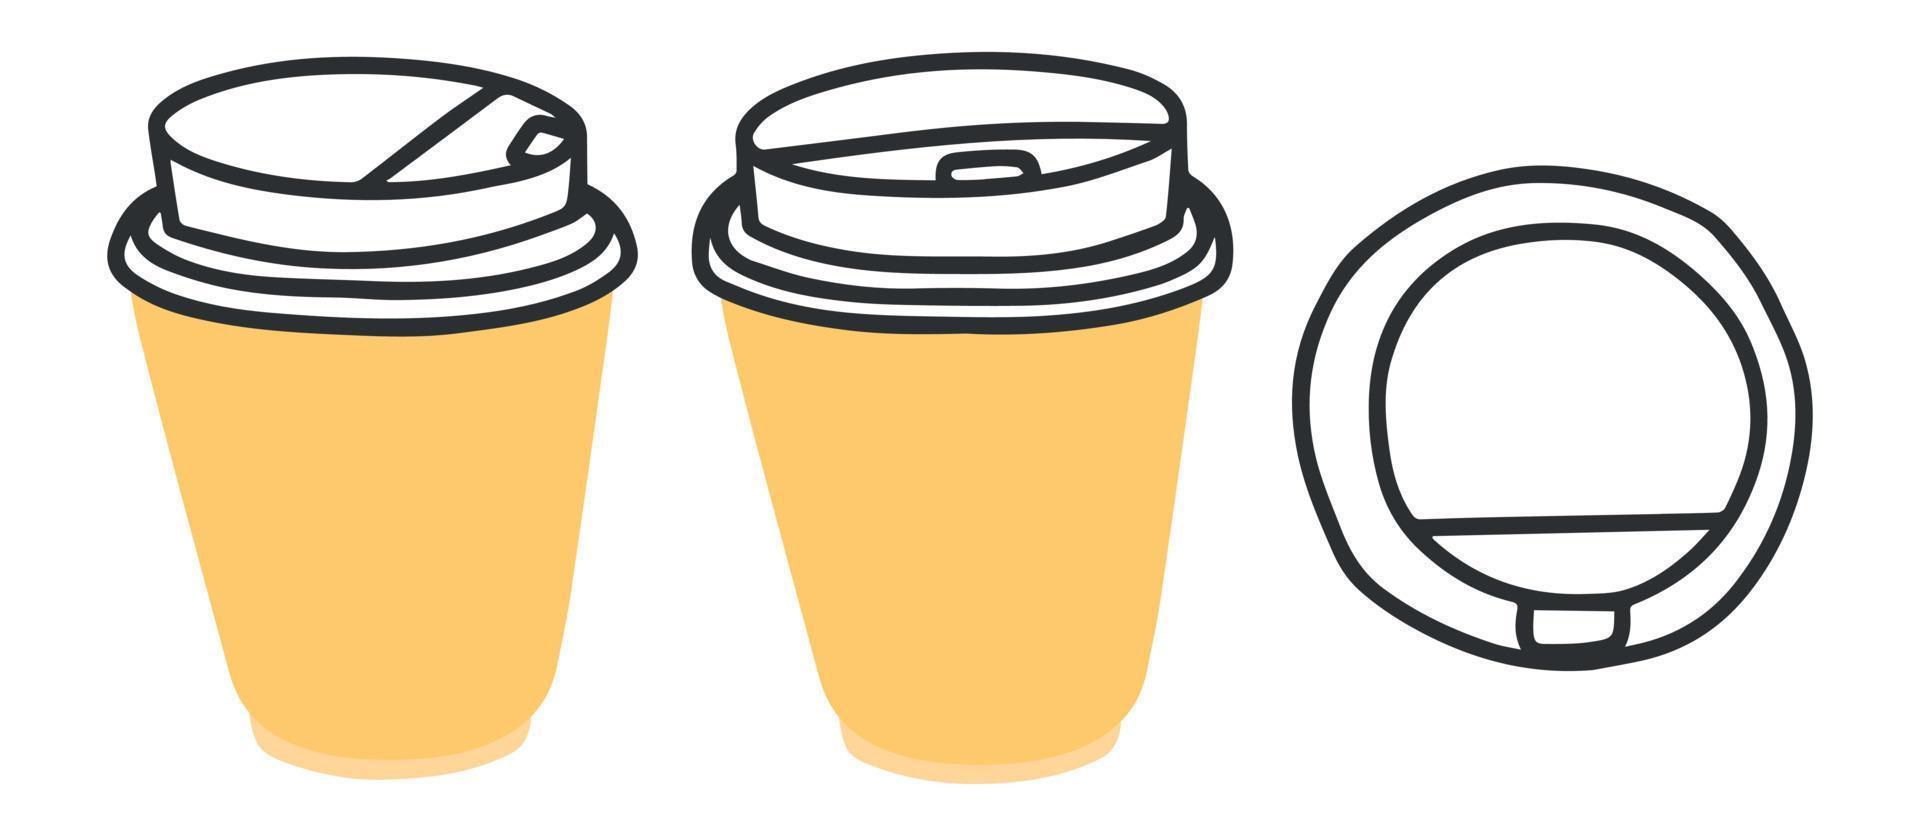 Cartoon set paper coffee cups on white background. vector